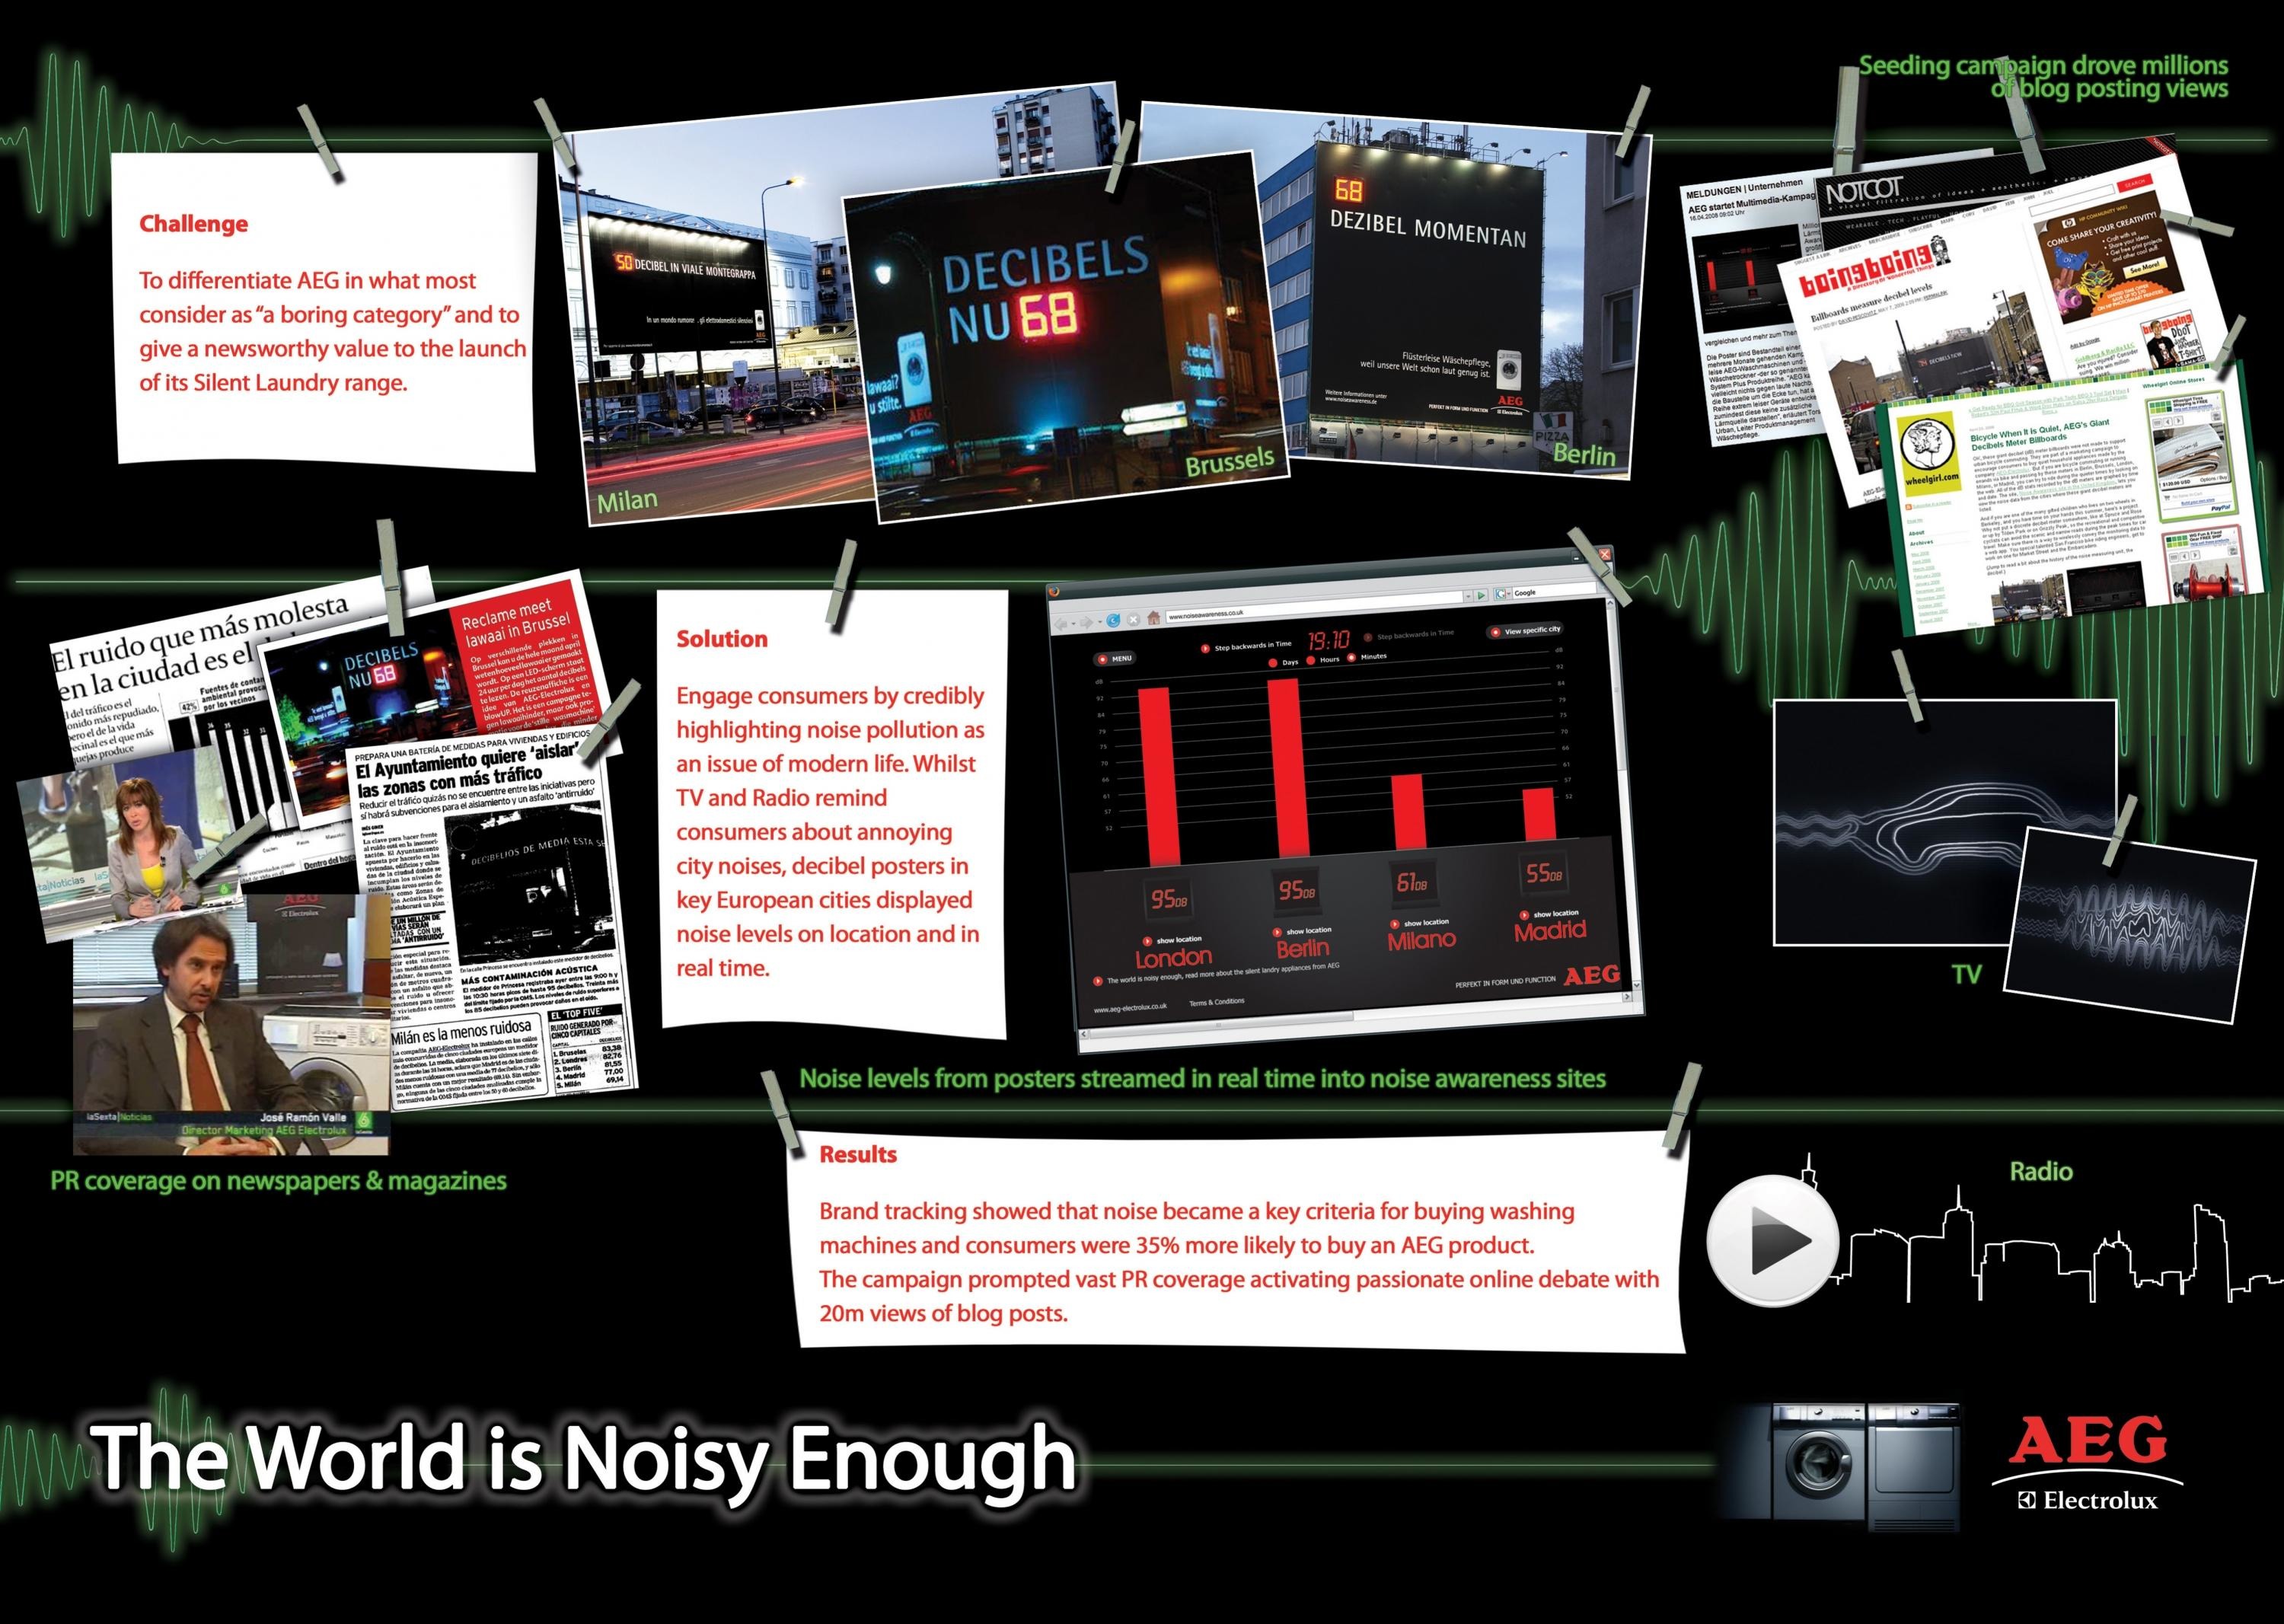 THE WORLD IS NOISY ENOUGH